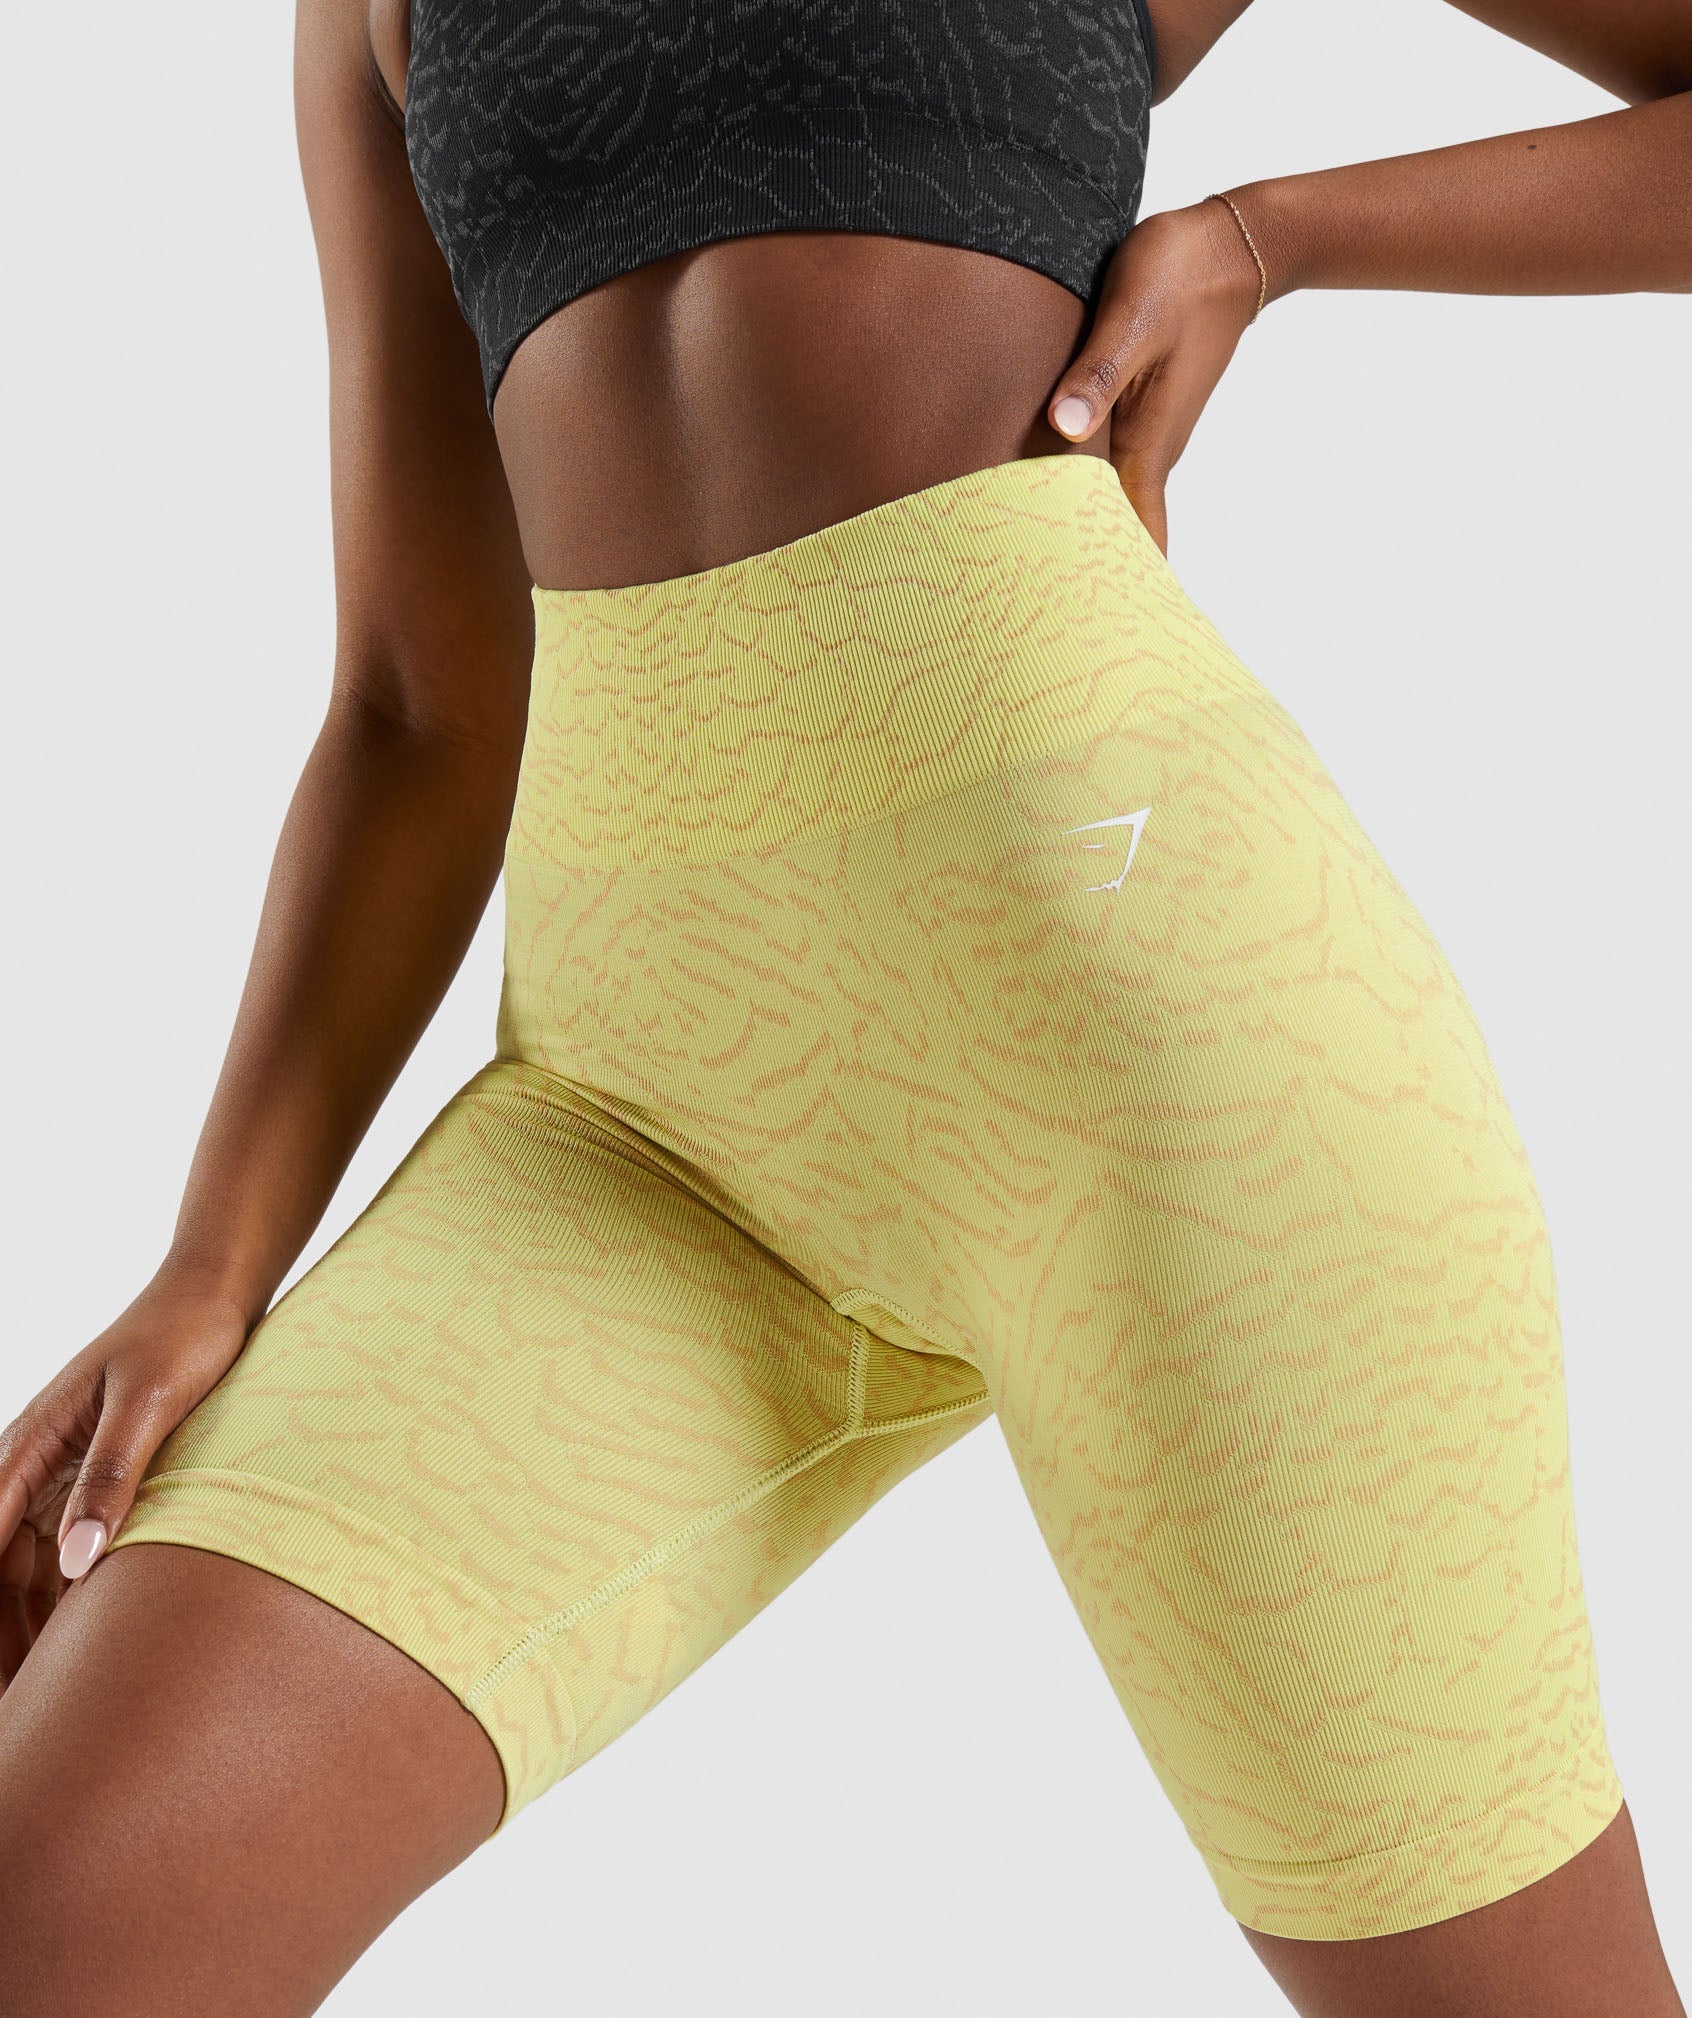 Adapt Animal Seamless Cycling Shorts in Firefly Yellow - view 6